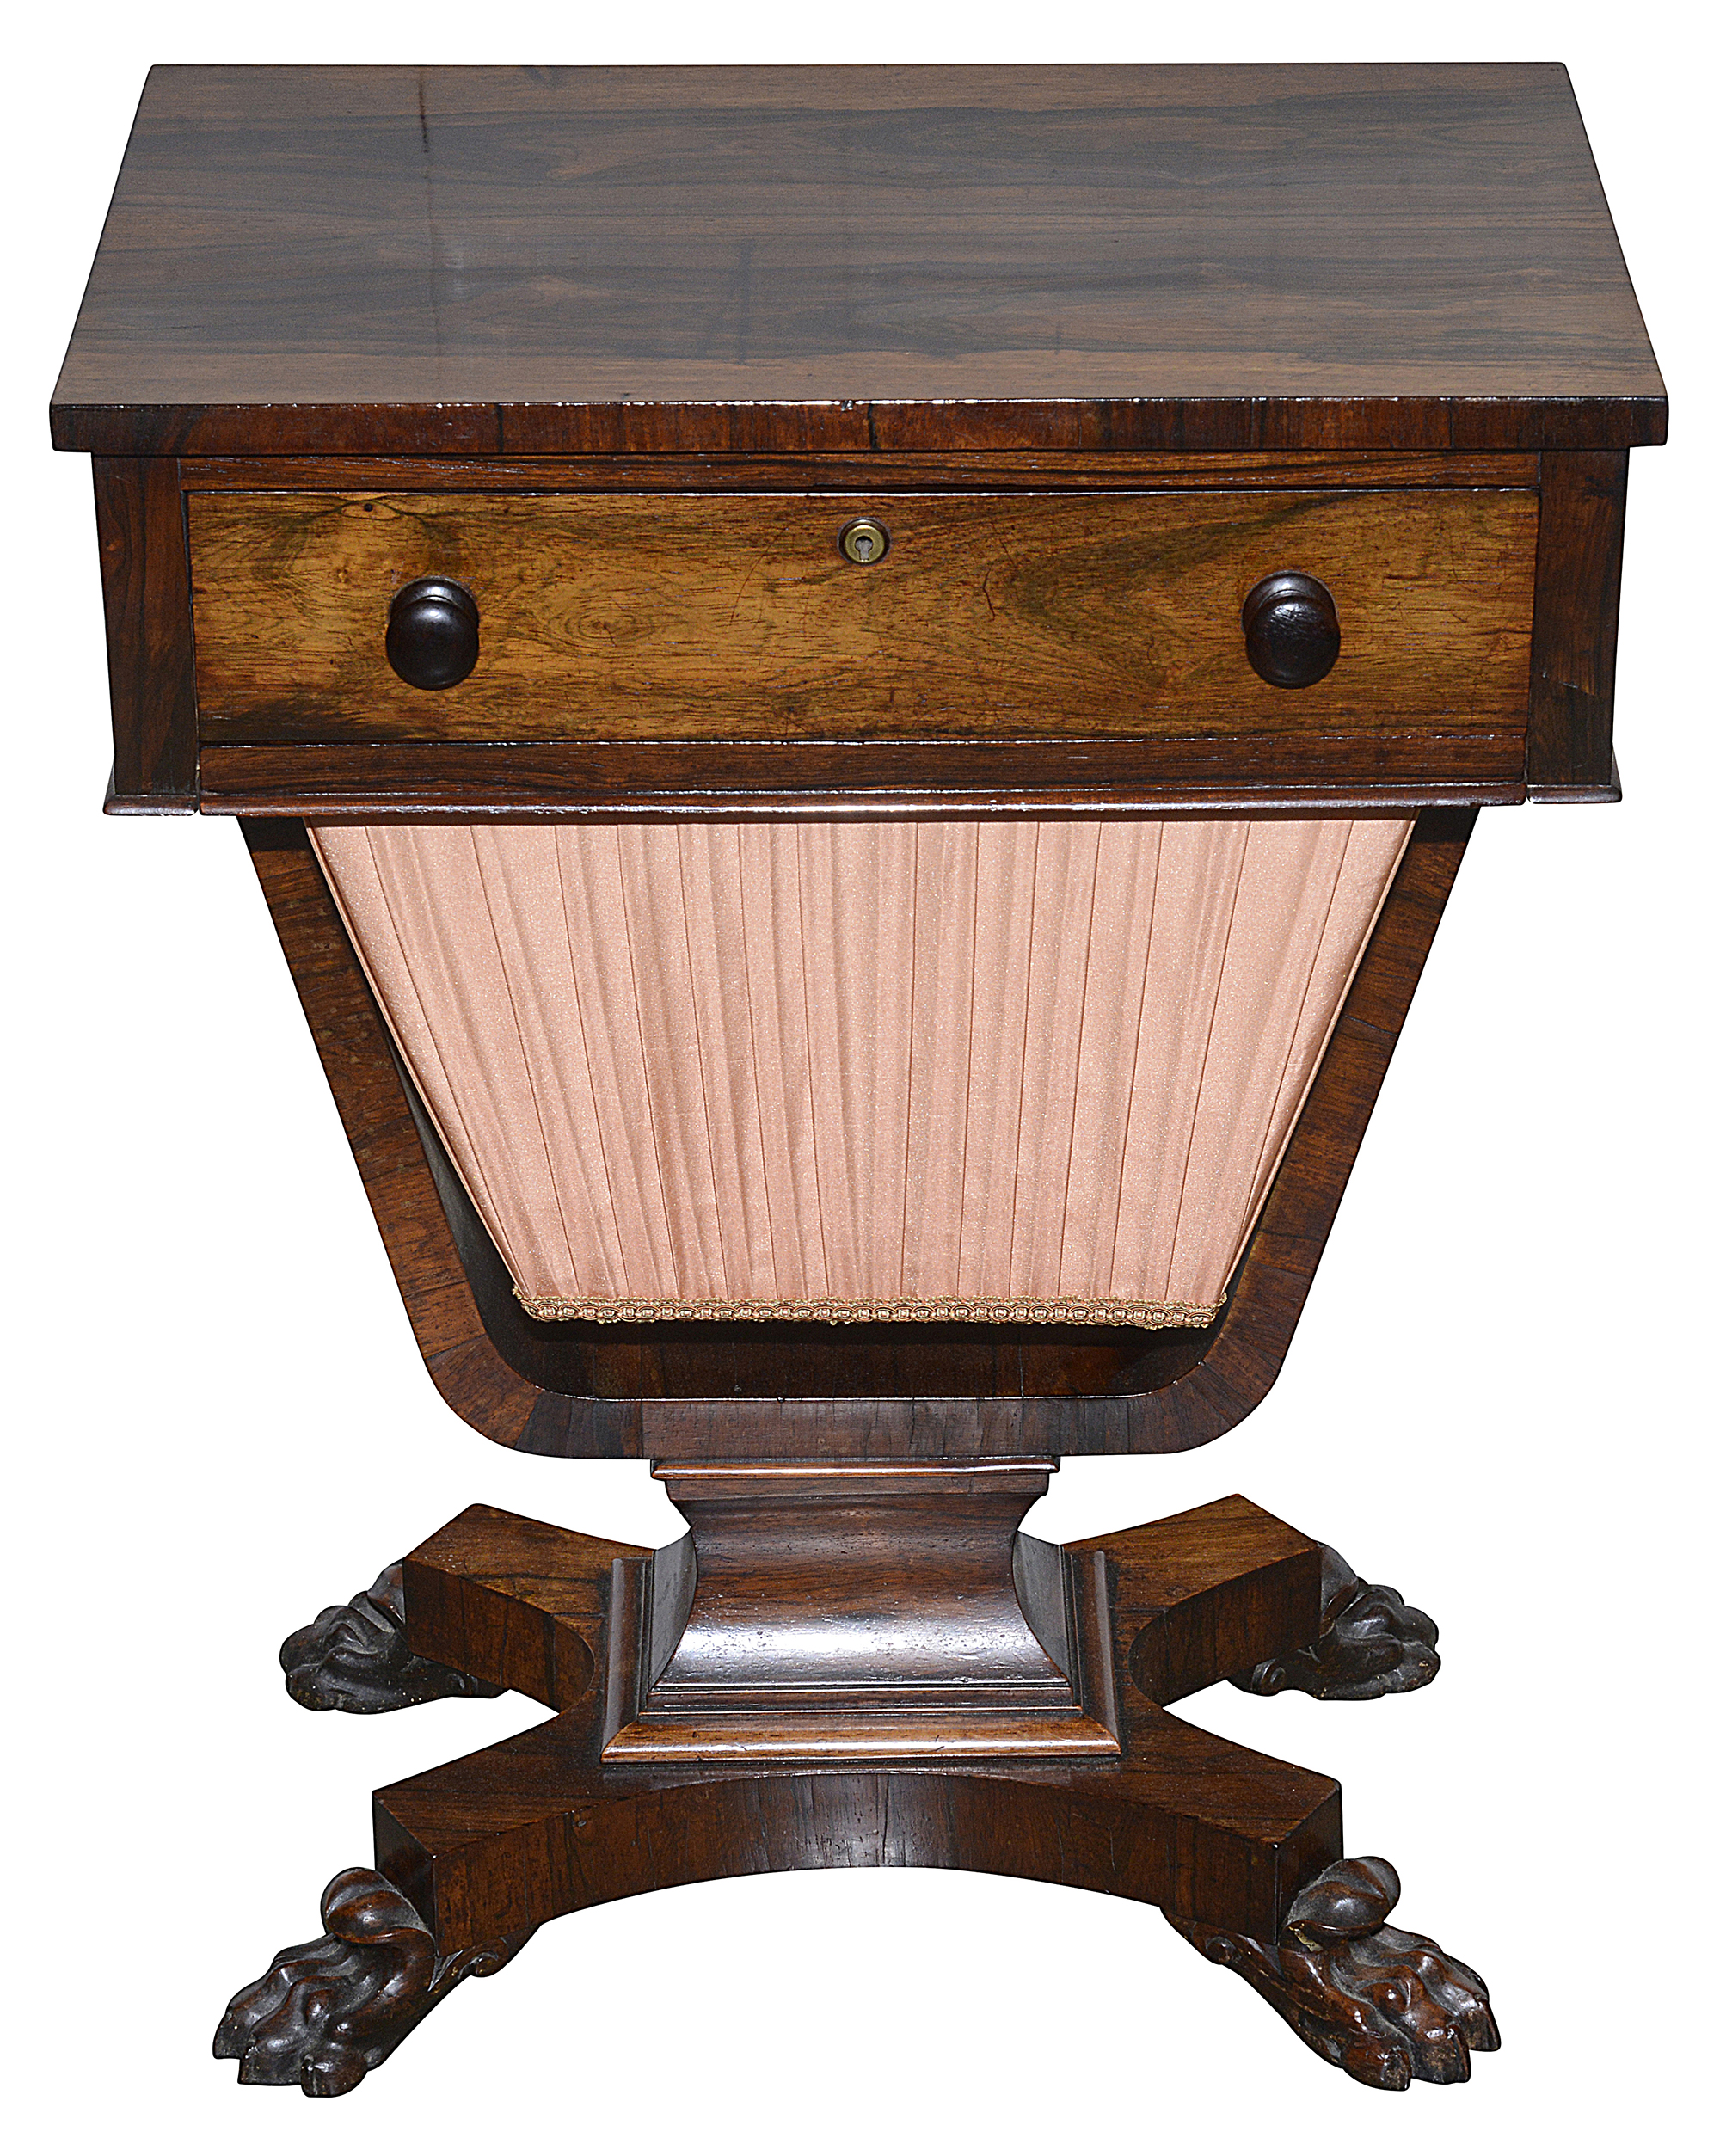 A William IV rosewood work table